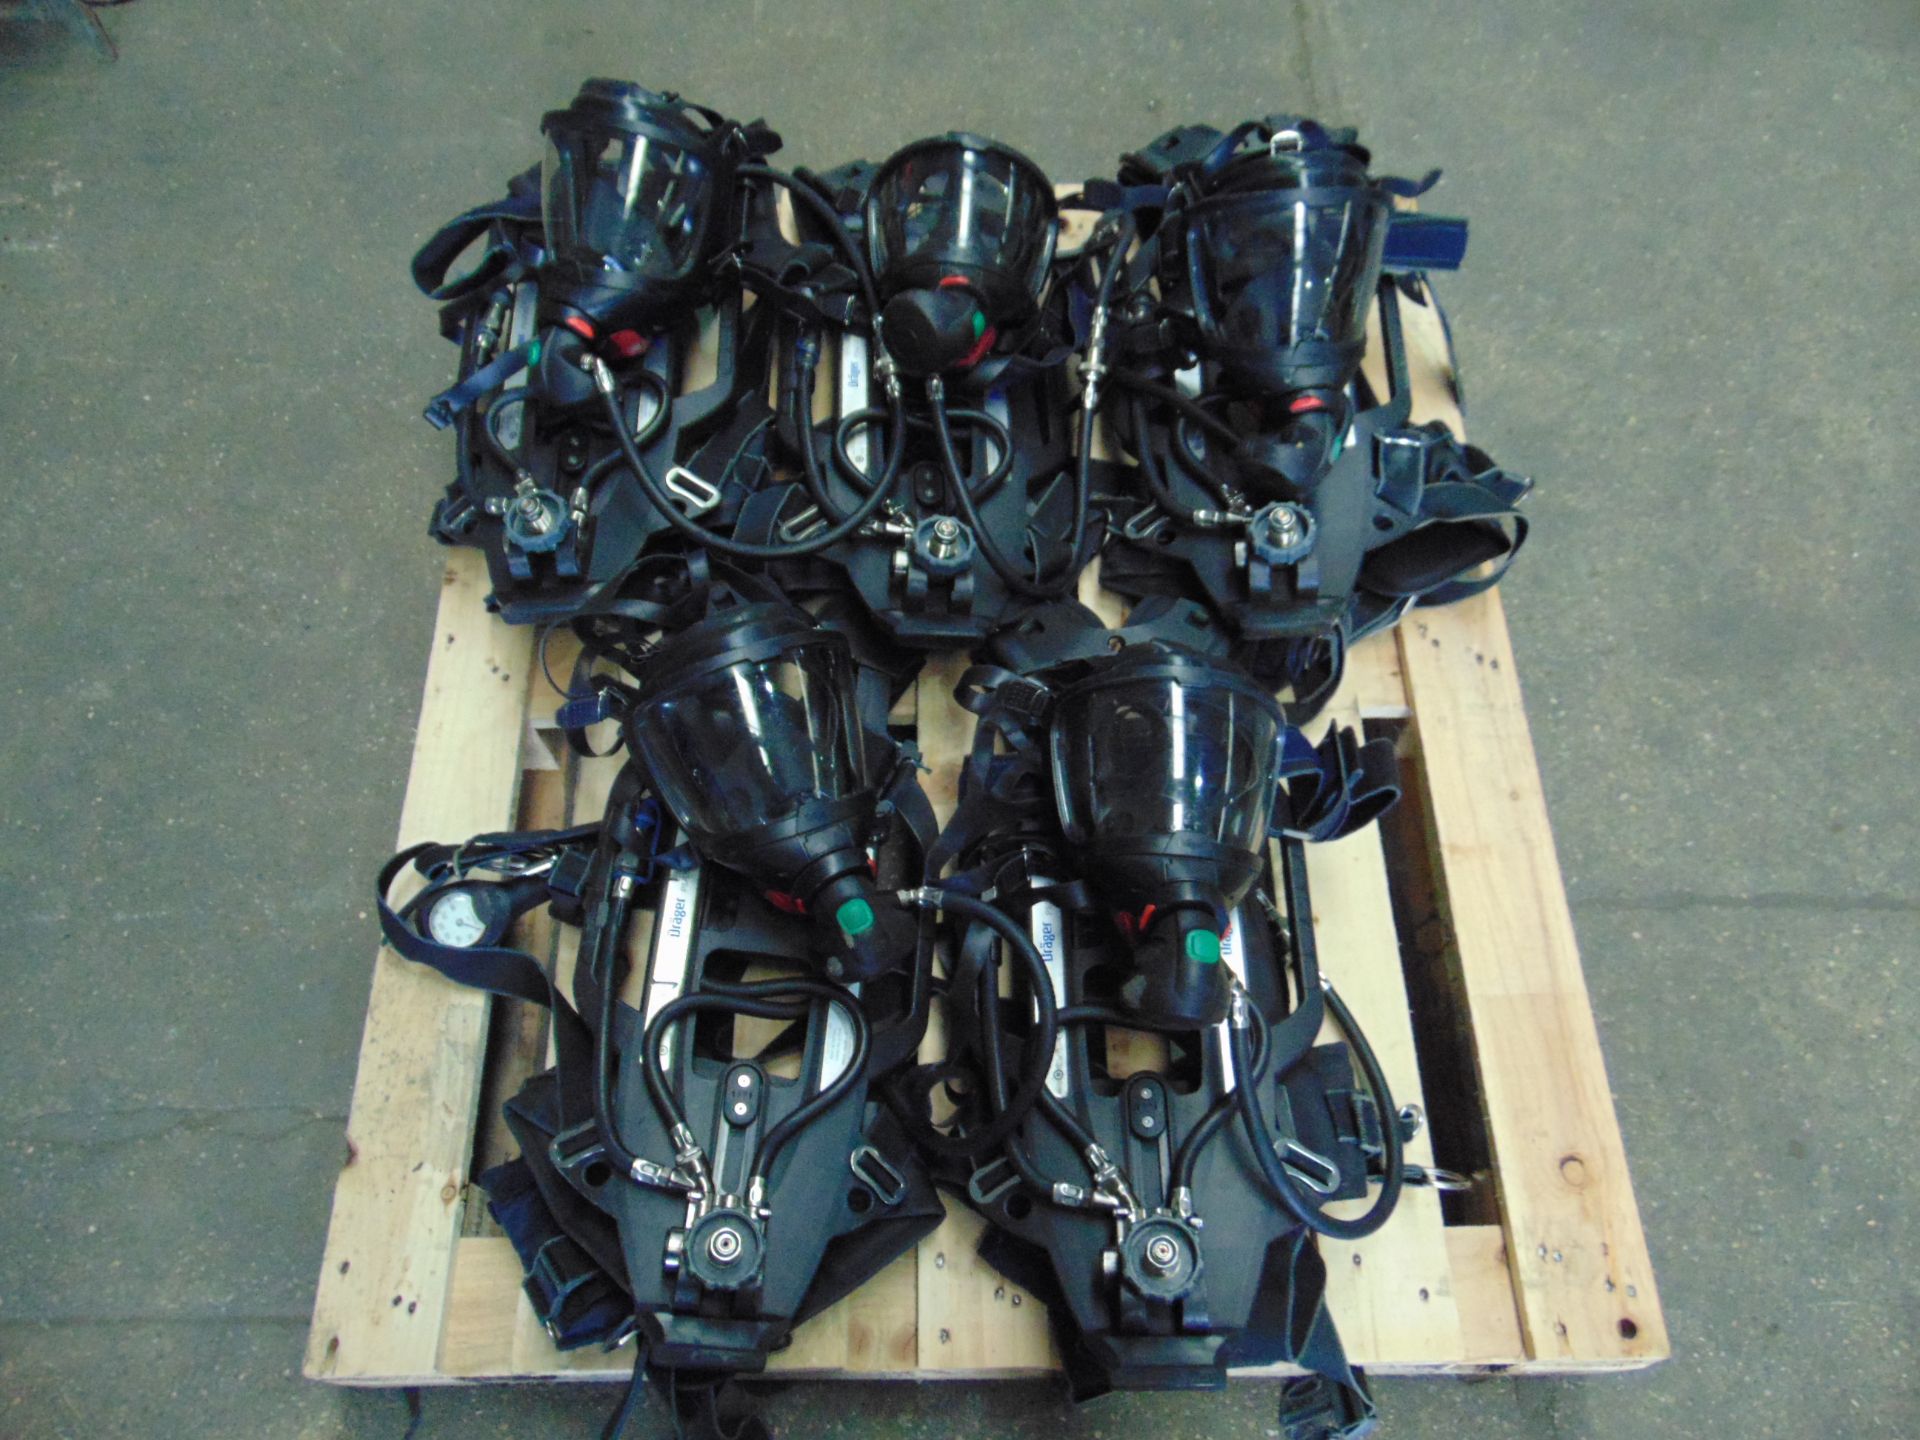 5 x Drager PSS 7000 Self Contained Breathing Apparatus w/ 10 x Drager 300 Bar Air Cylinders - Image 7 of 21